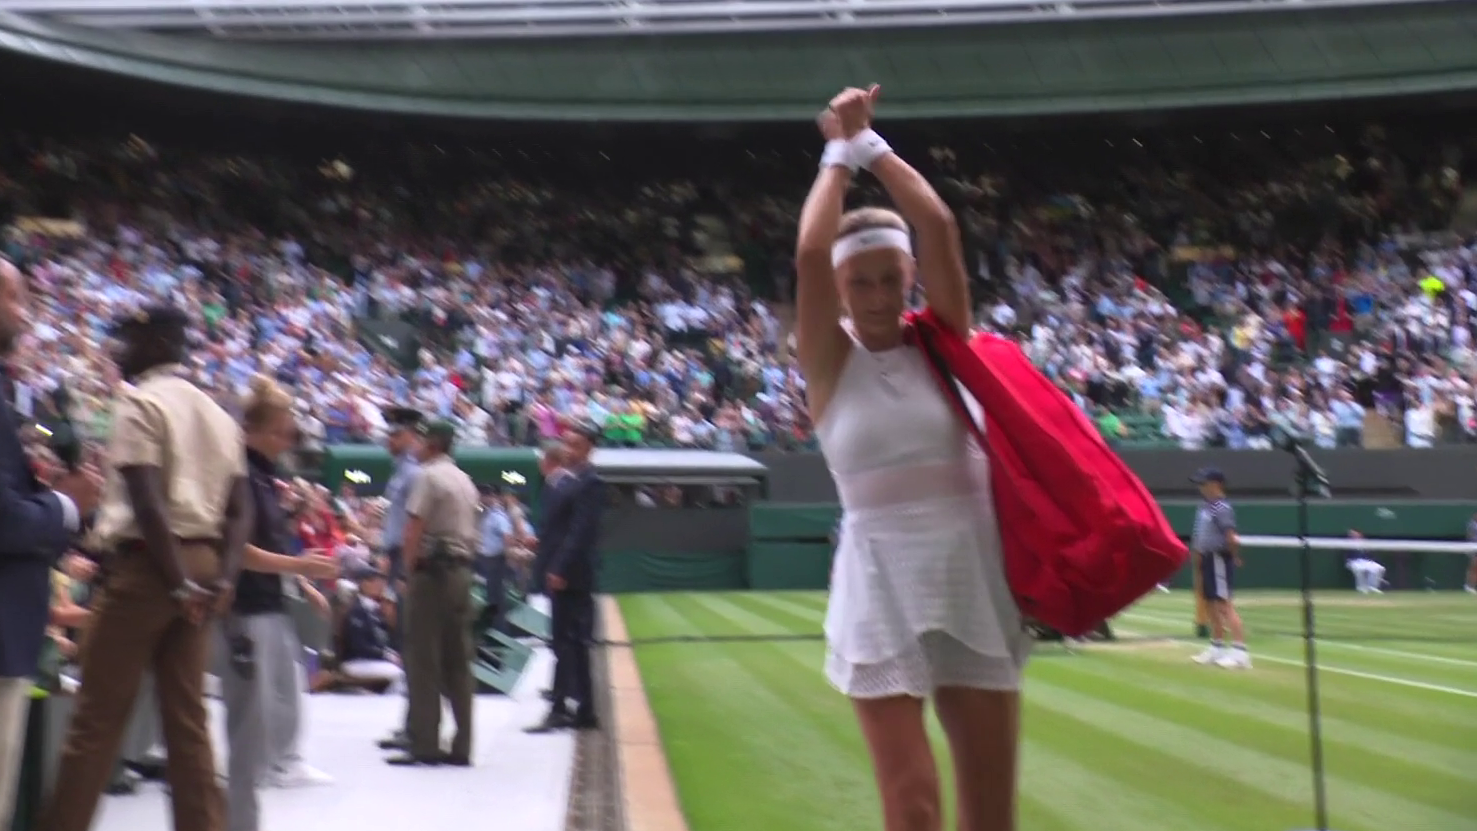 Victoria Azarenka raises her fists as if to signal they are cuffed after her loss to ELina Svitolina at Wimbledon.